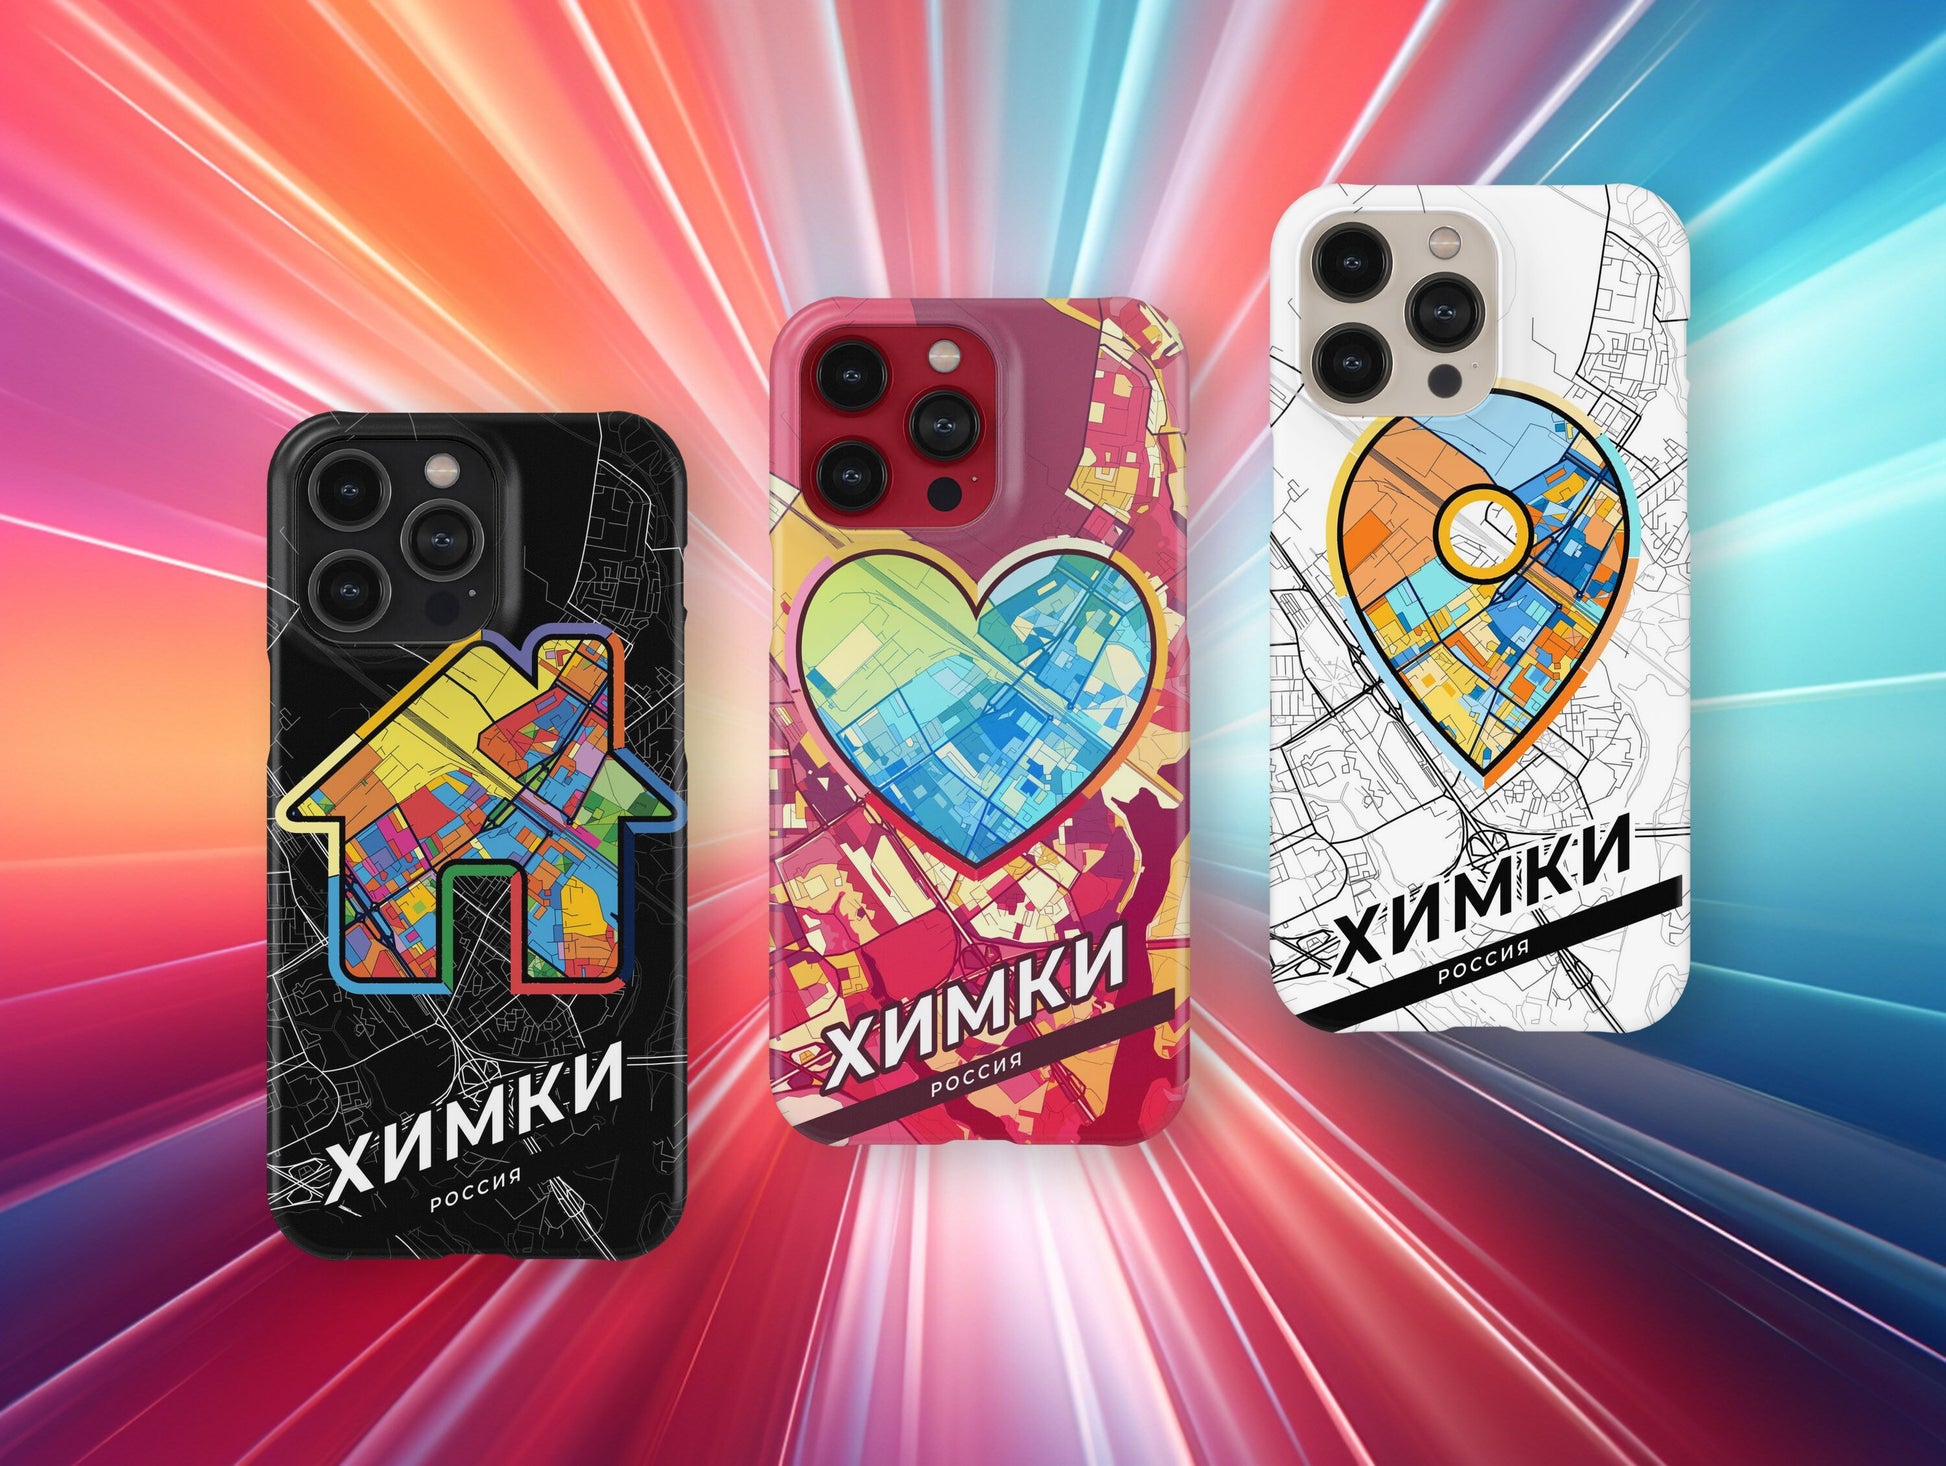 Khimki Russia slim phone case with colorful icon. Birthday, wedding or housewarming gift. Couple match cases.